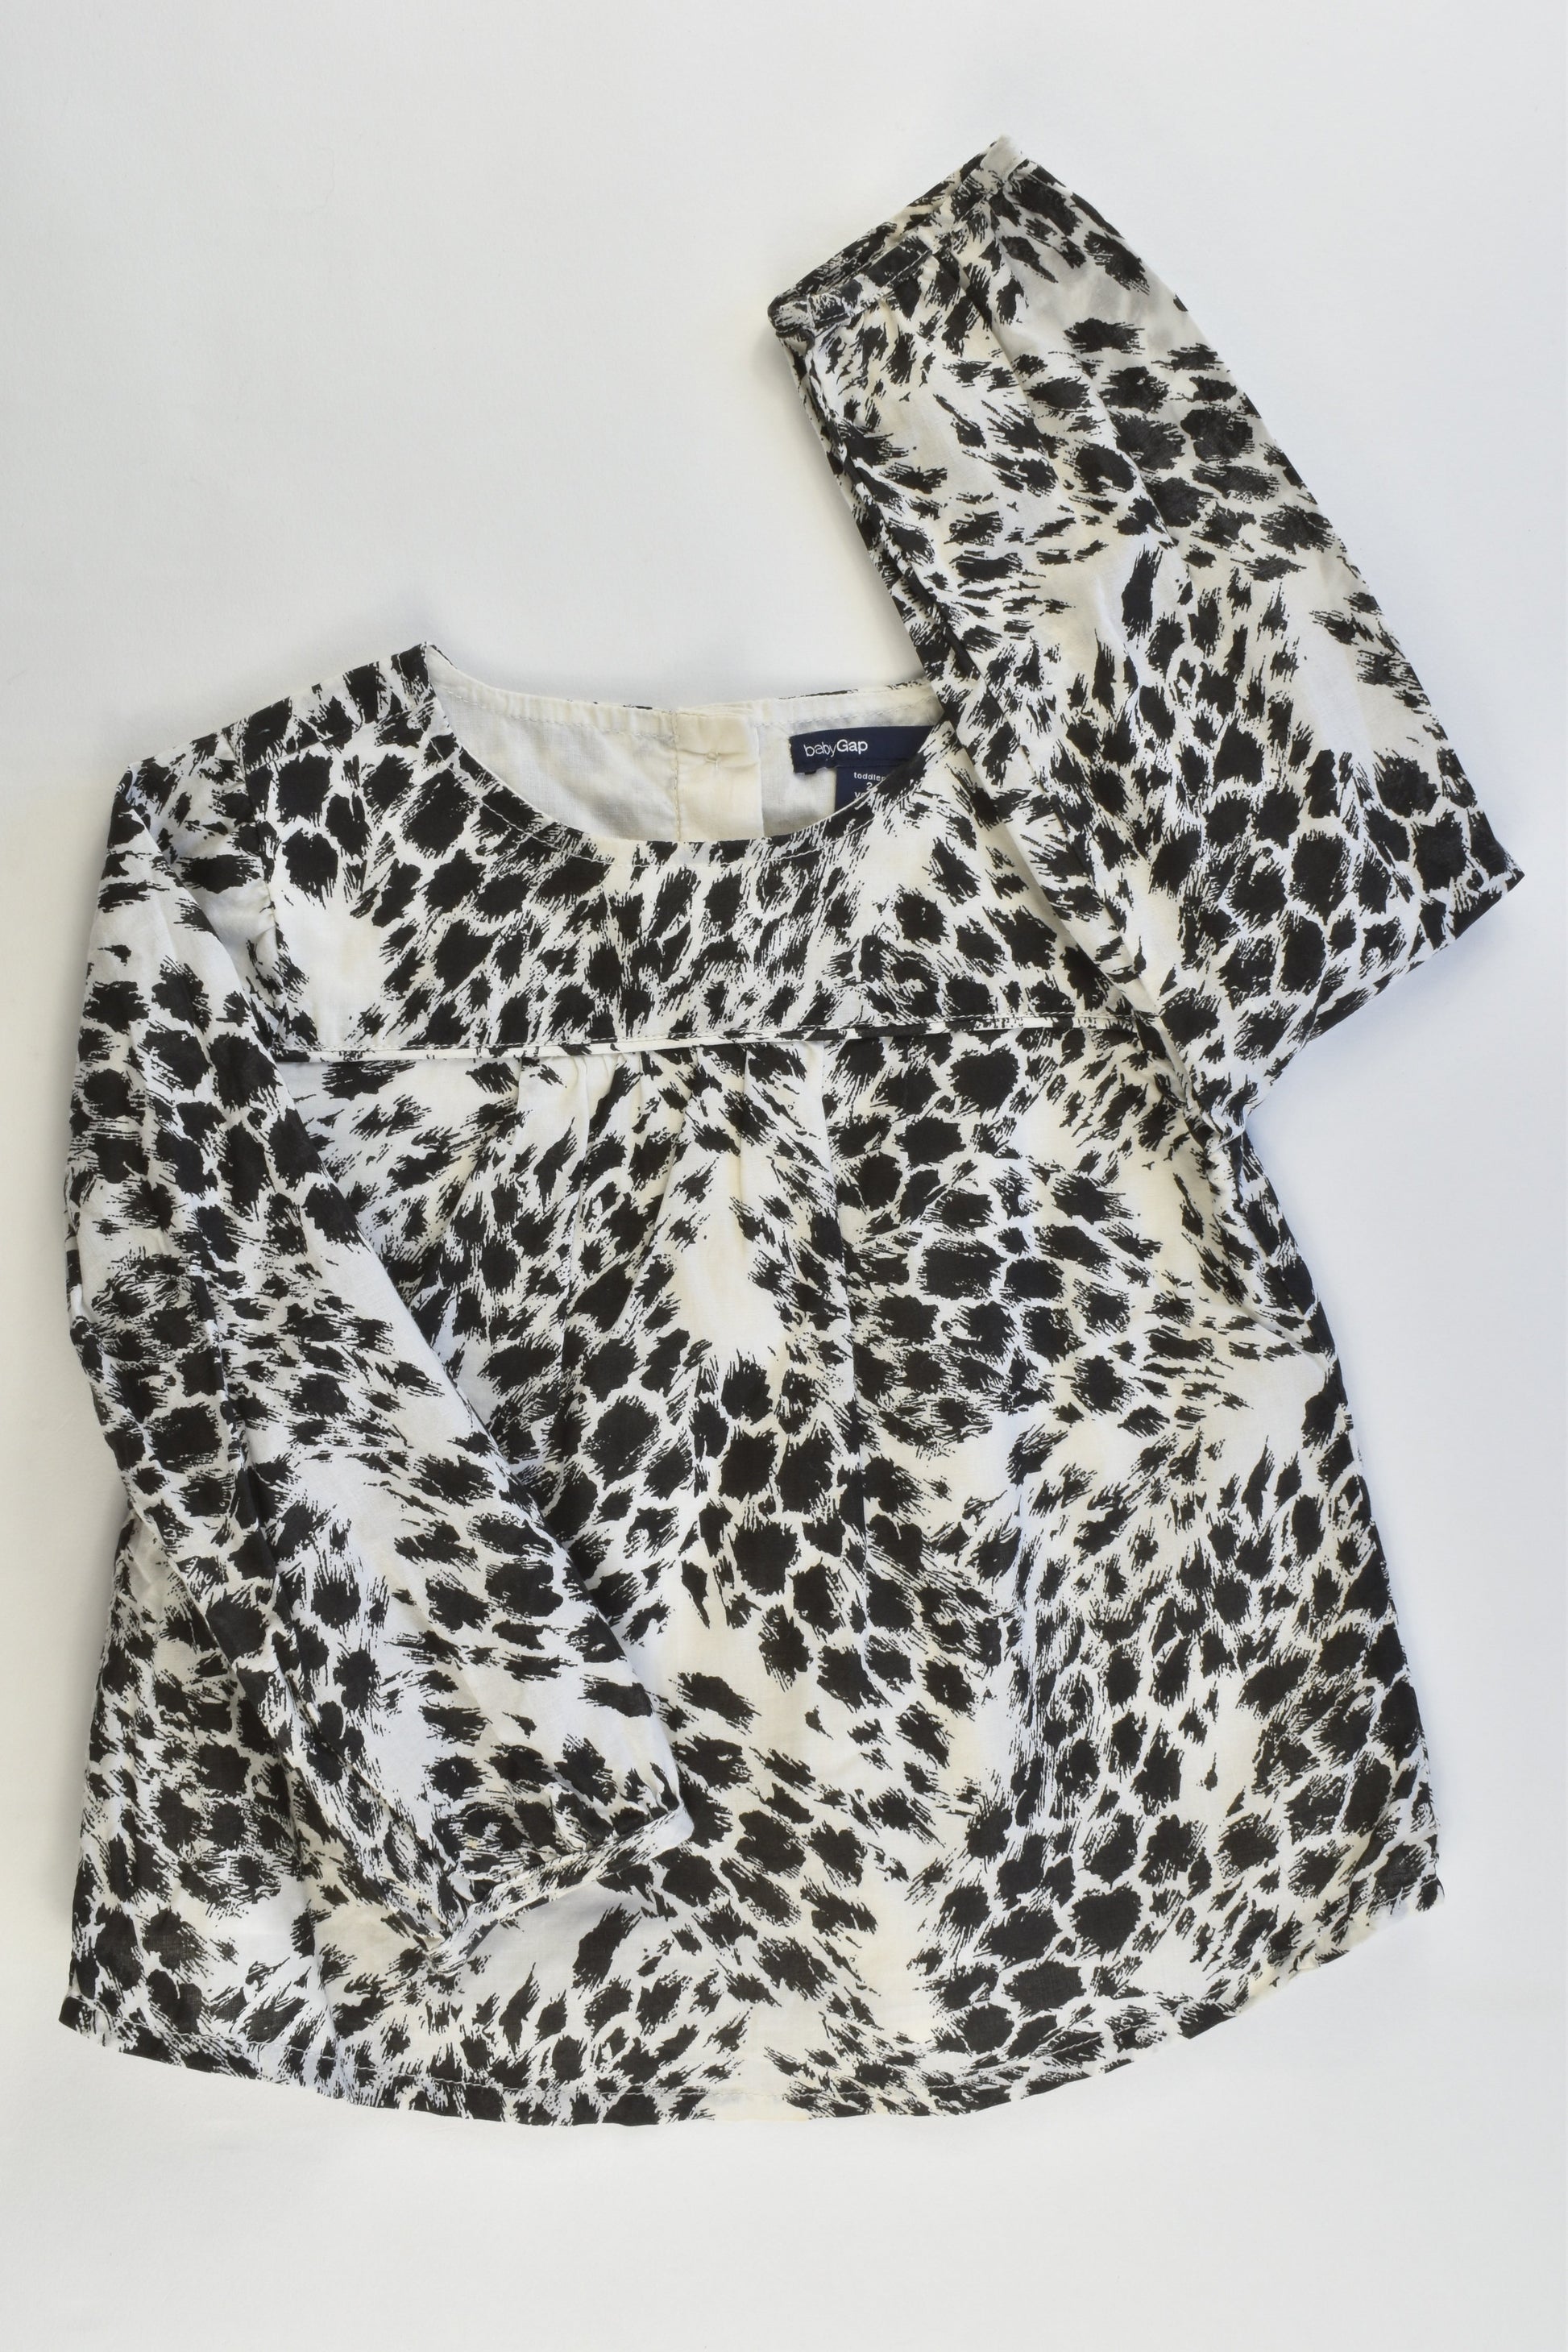 Baby Gap Size 2 Lined Blouse